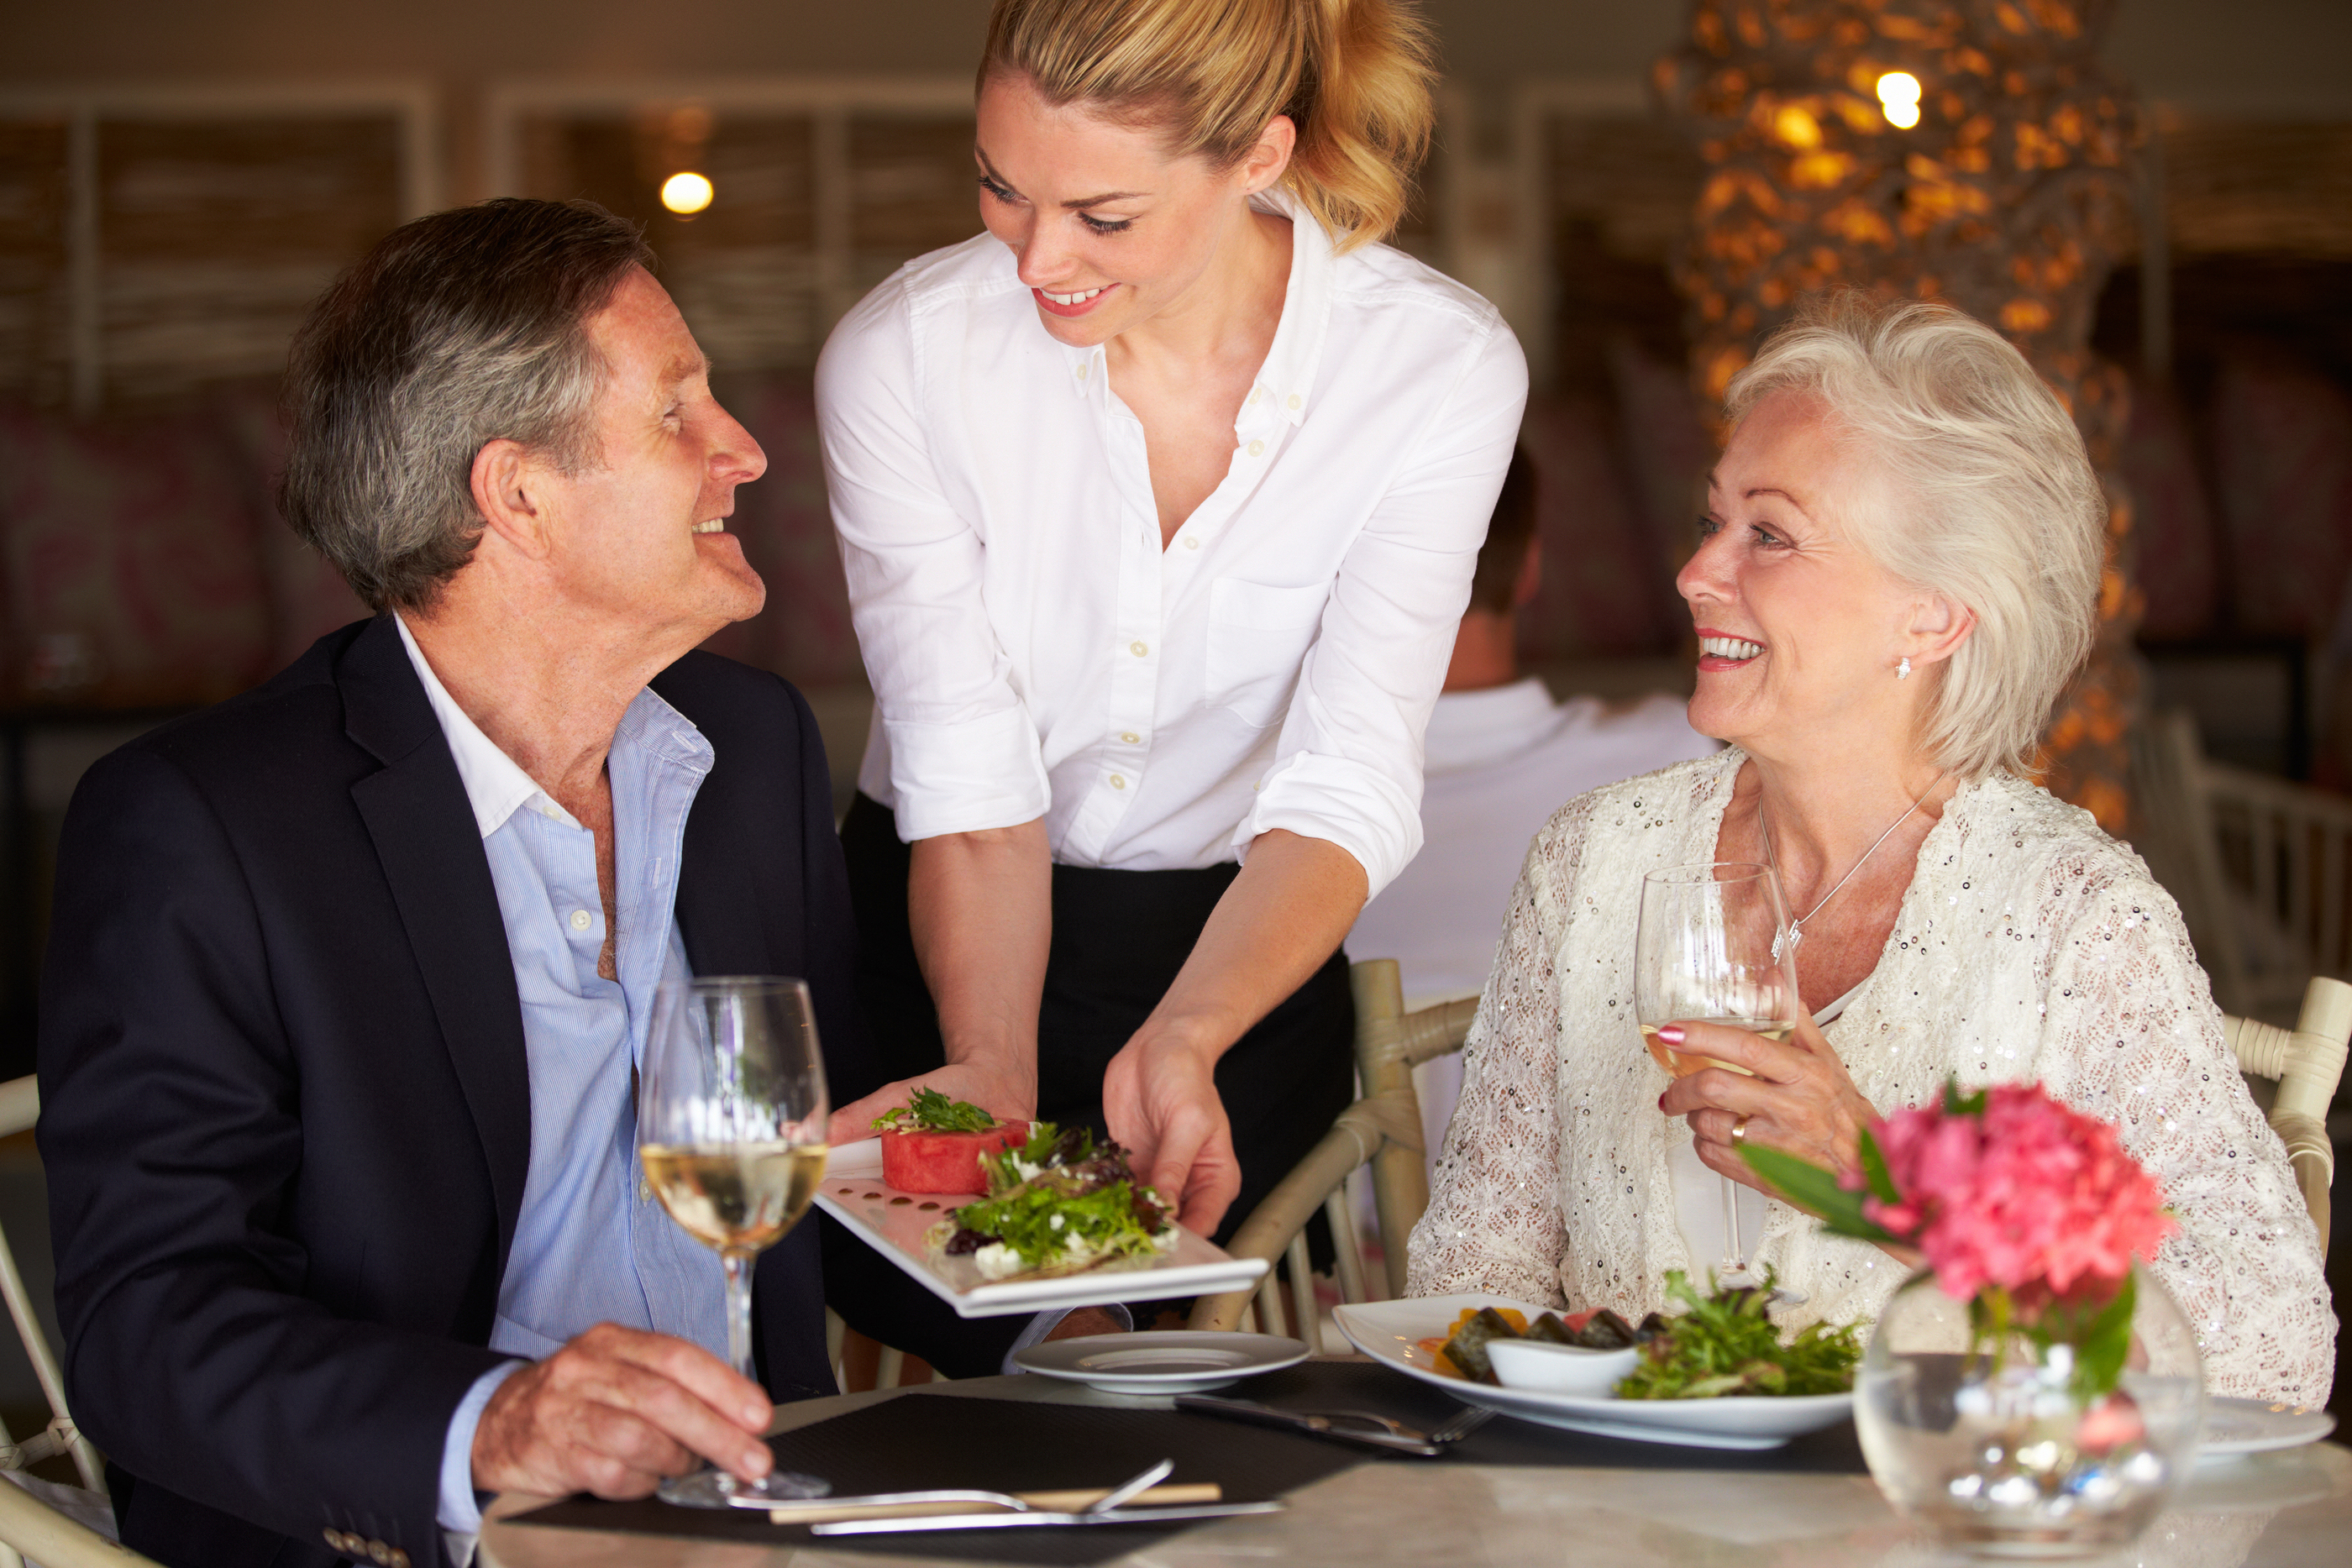 How to Improve Your Customer Service with Restaurant Management